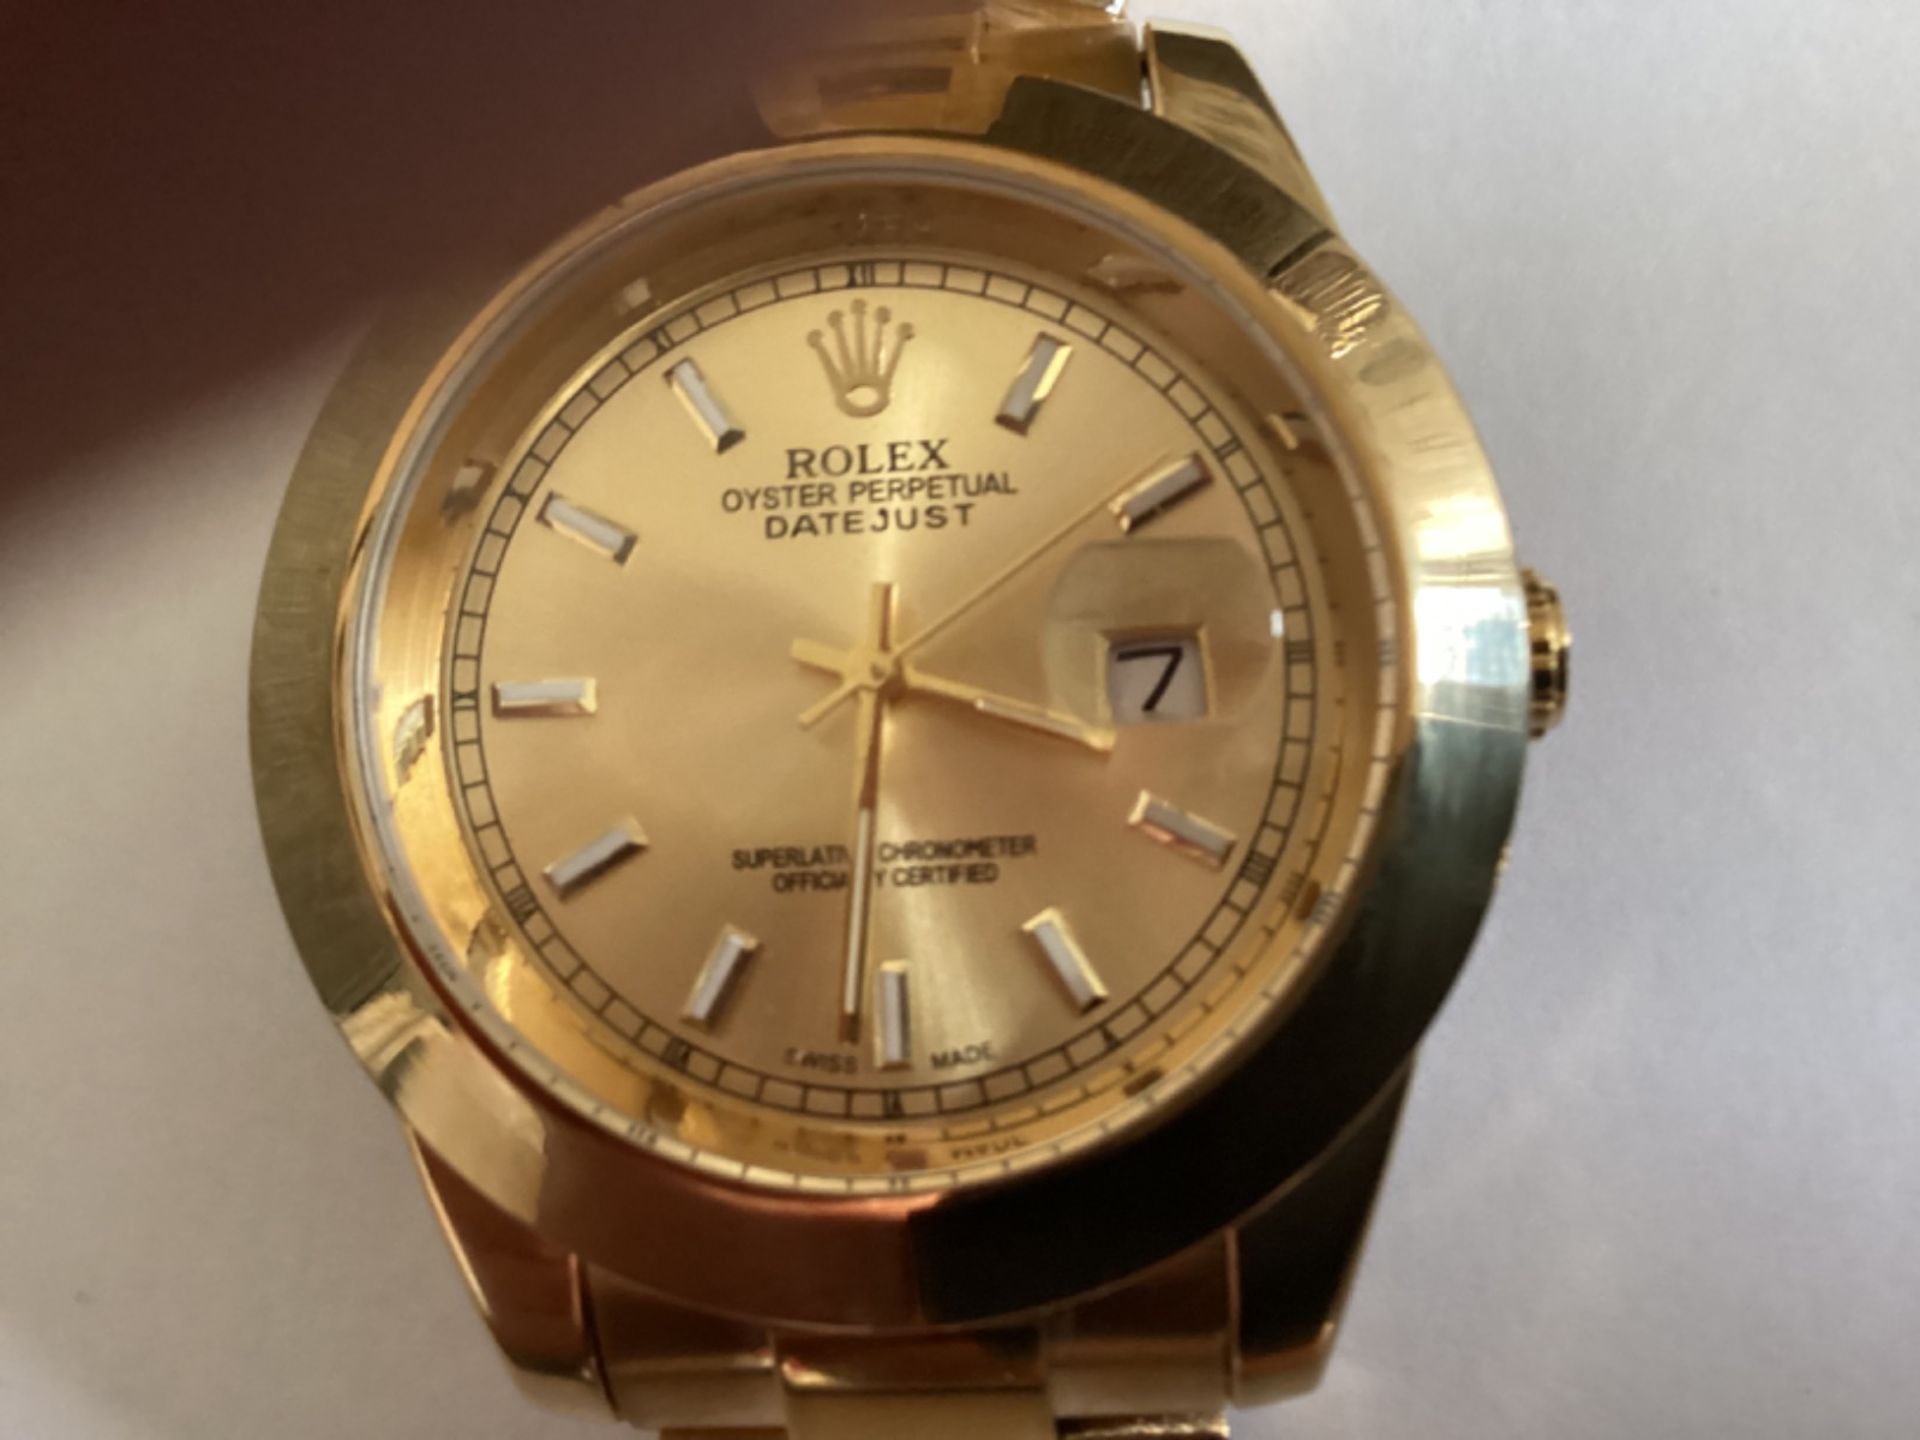 ROLEX OYSTER PERPETUAL DATE JUST WATCH, NO BOX/PAPERS *NO VAT* - Image 2 of 3